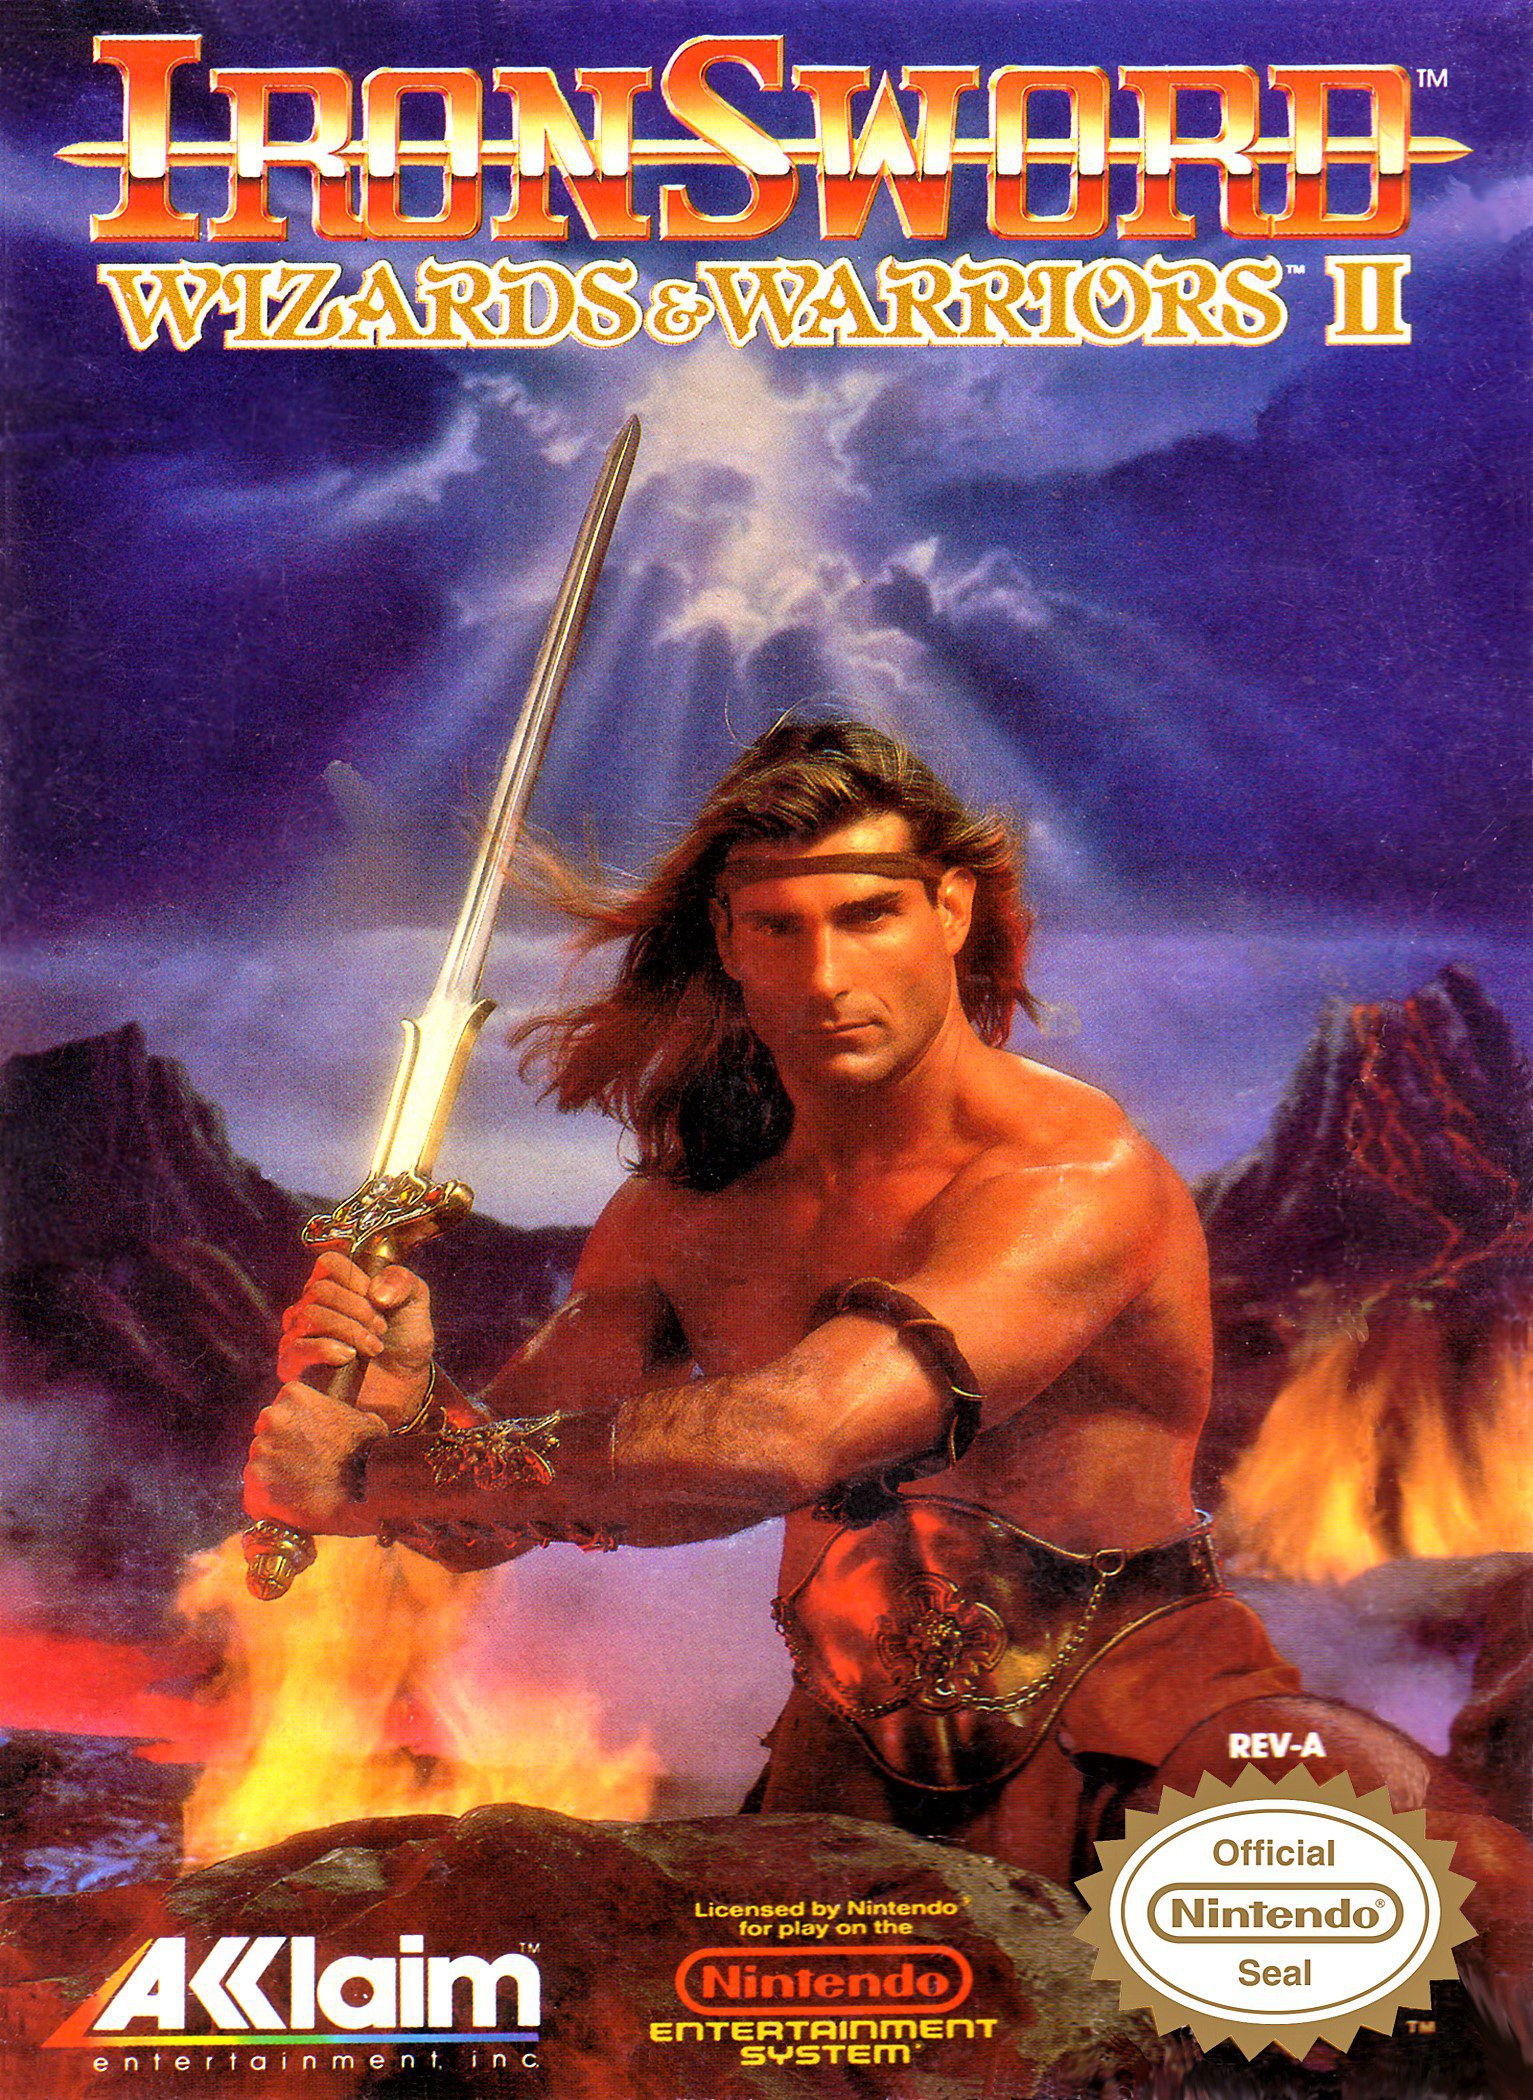 IronSword: Wizards & Warriors II for Nintendo Entertainment System (NES)